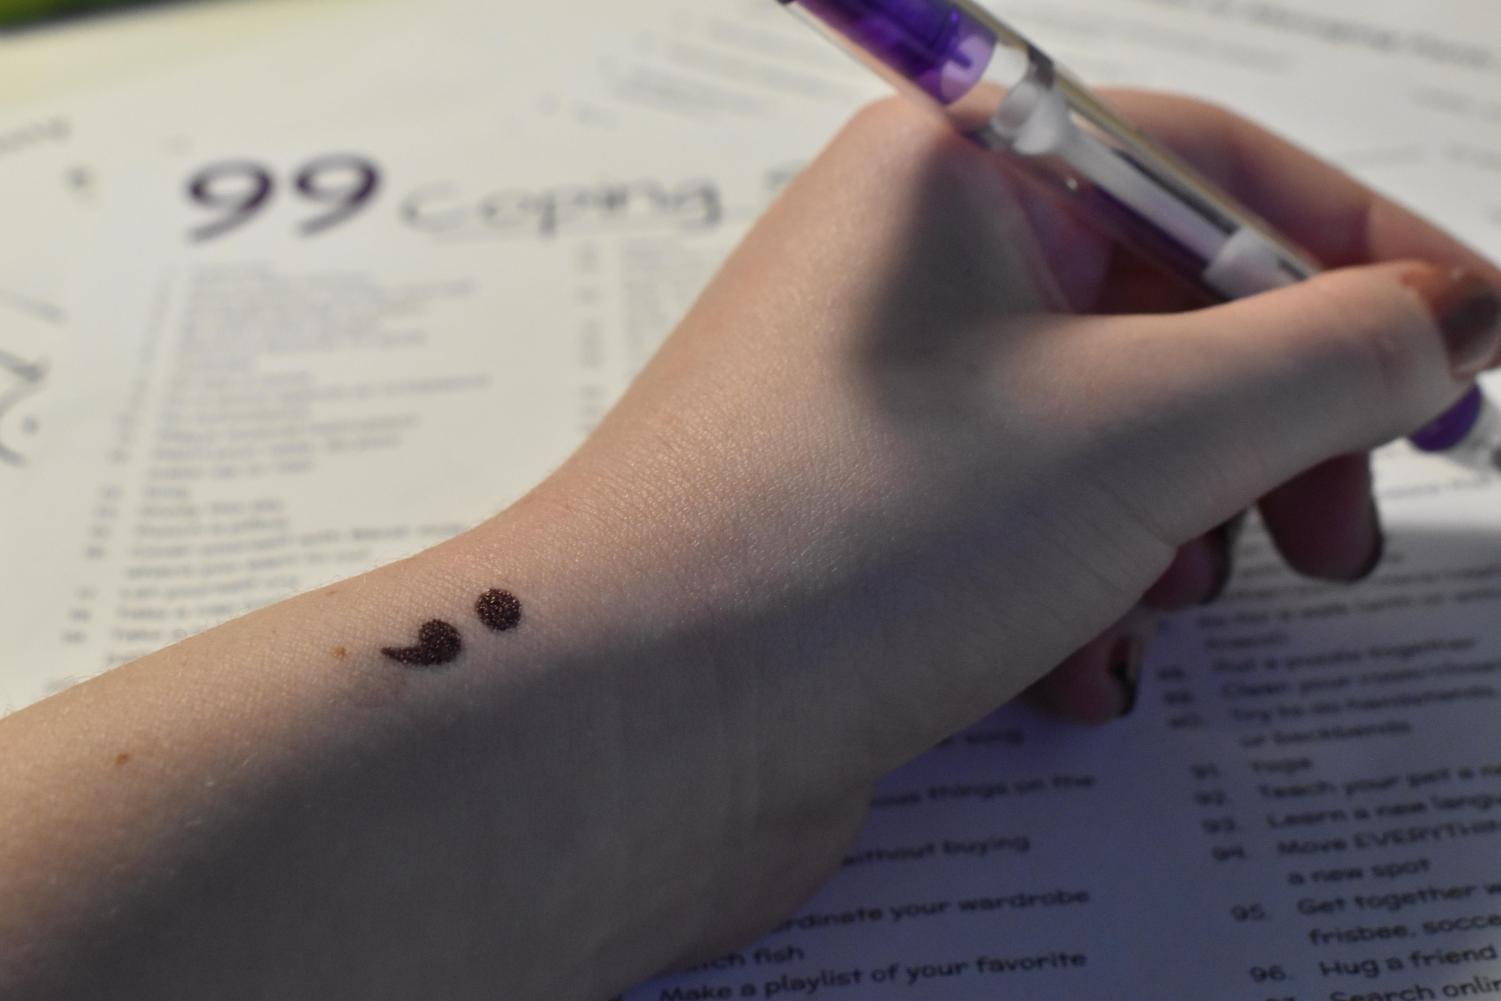 The meaning behind the semicolon tattoo and why it's important